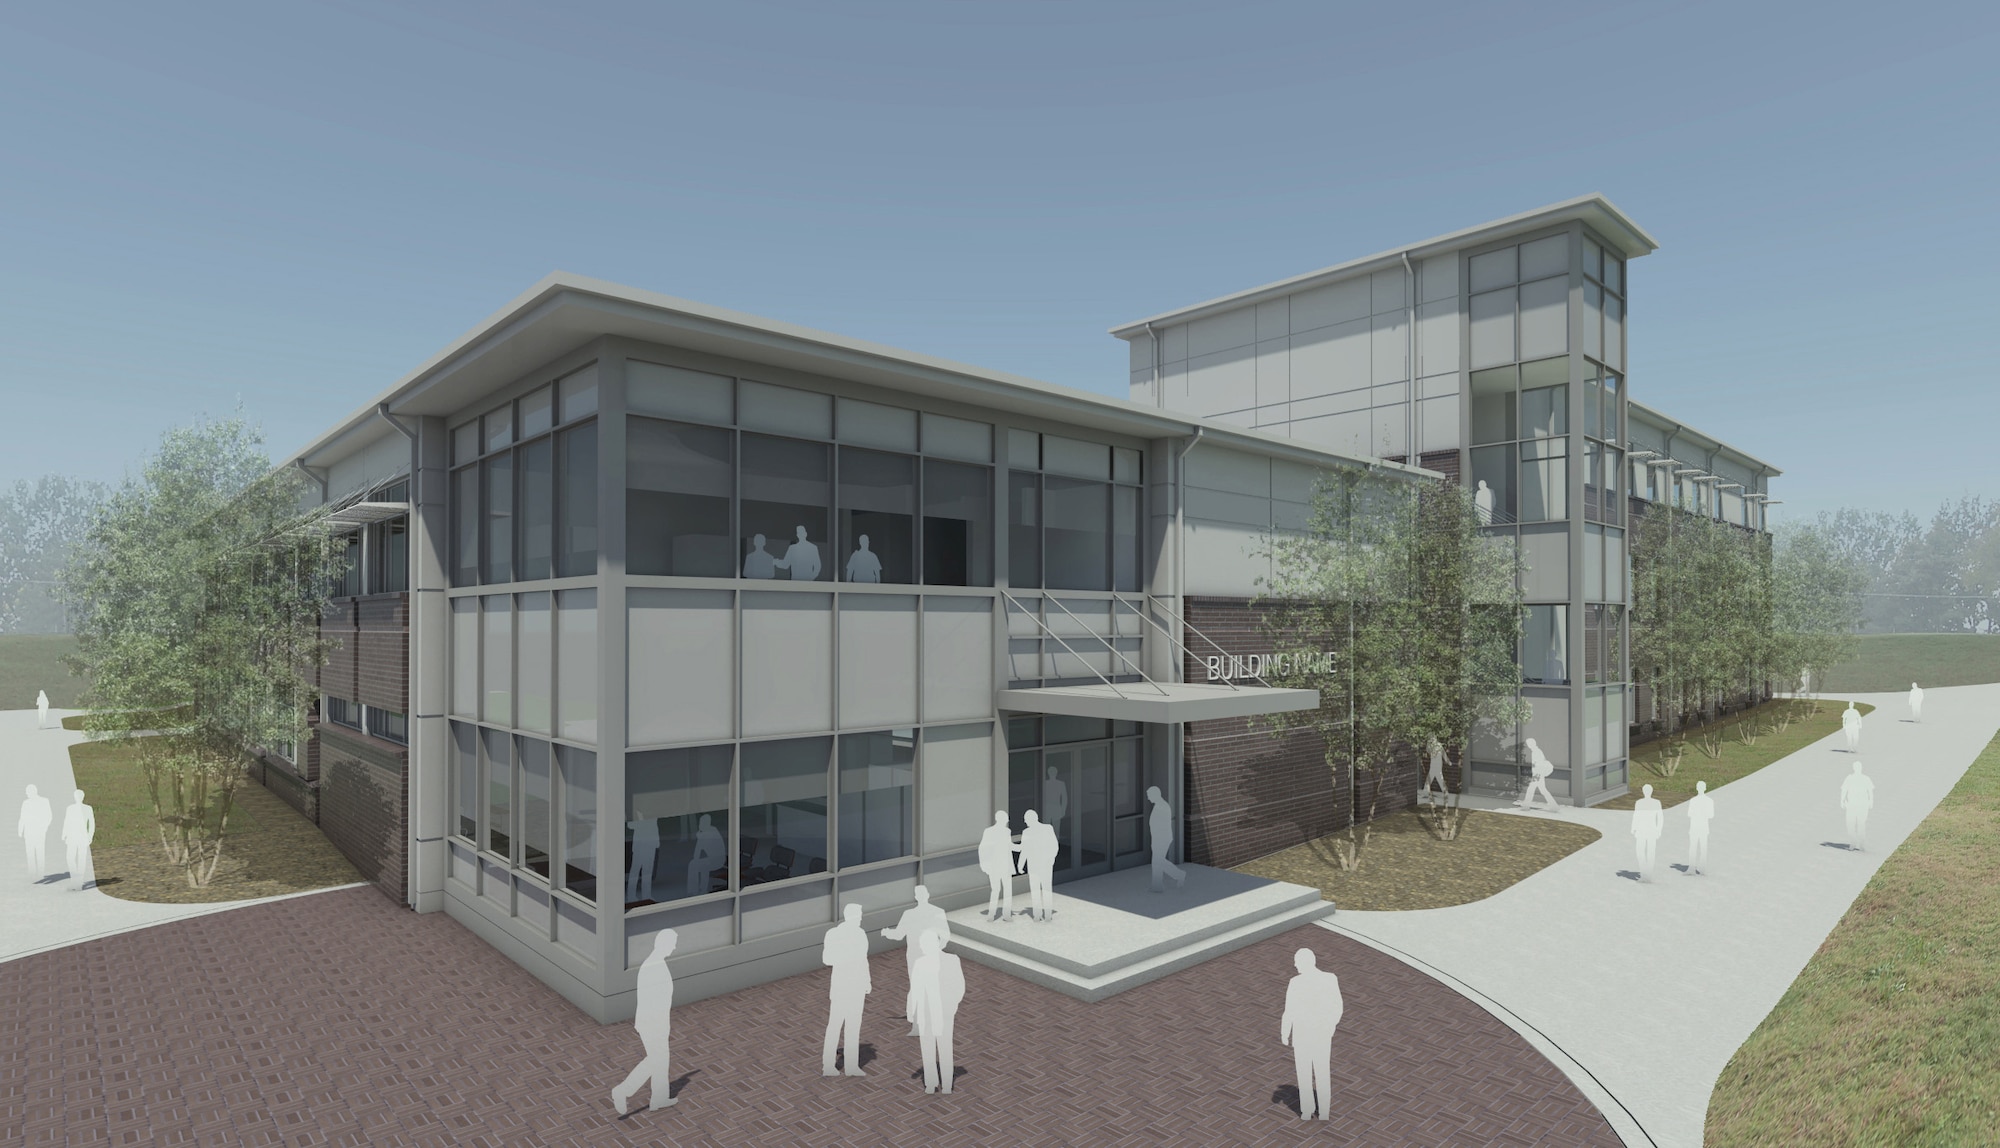 MCGHEE TYSON AIR NATIONAL GUARD BASE, Tenn. - This color rendering shows the projected, nearly 47,000 square foot, dormitory and classroom facility at the I.G. Brown Training and Education Center. (Illustration courtesy of the 134th Civil Engineer Squadron/Released)